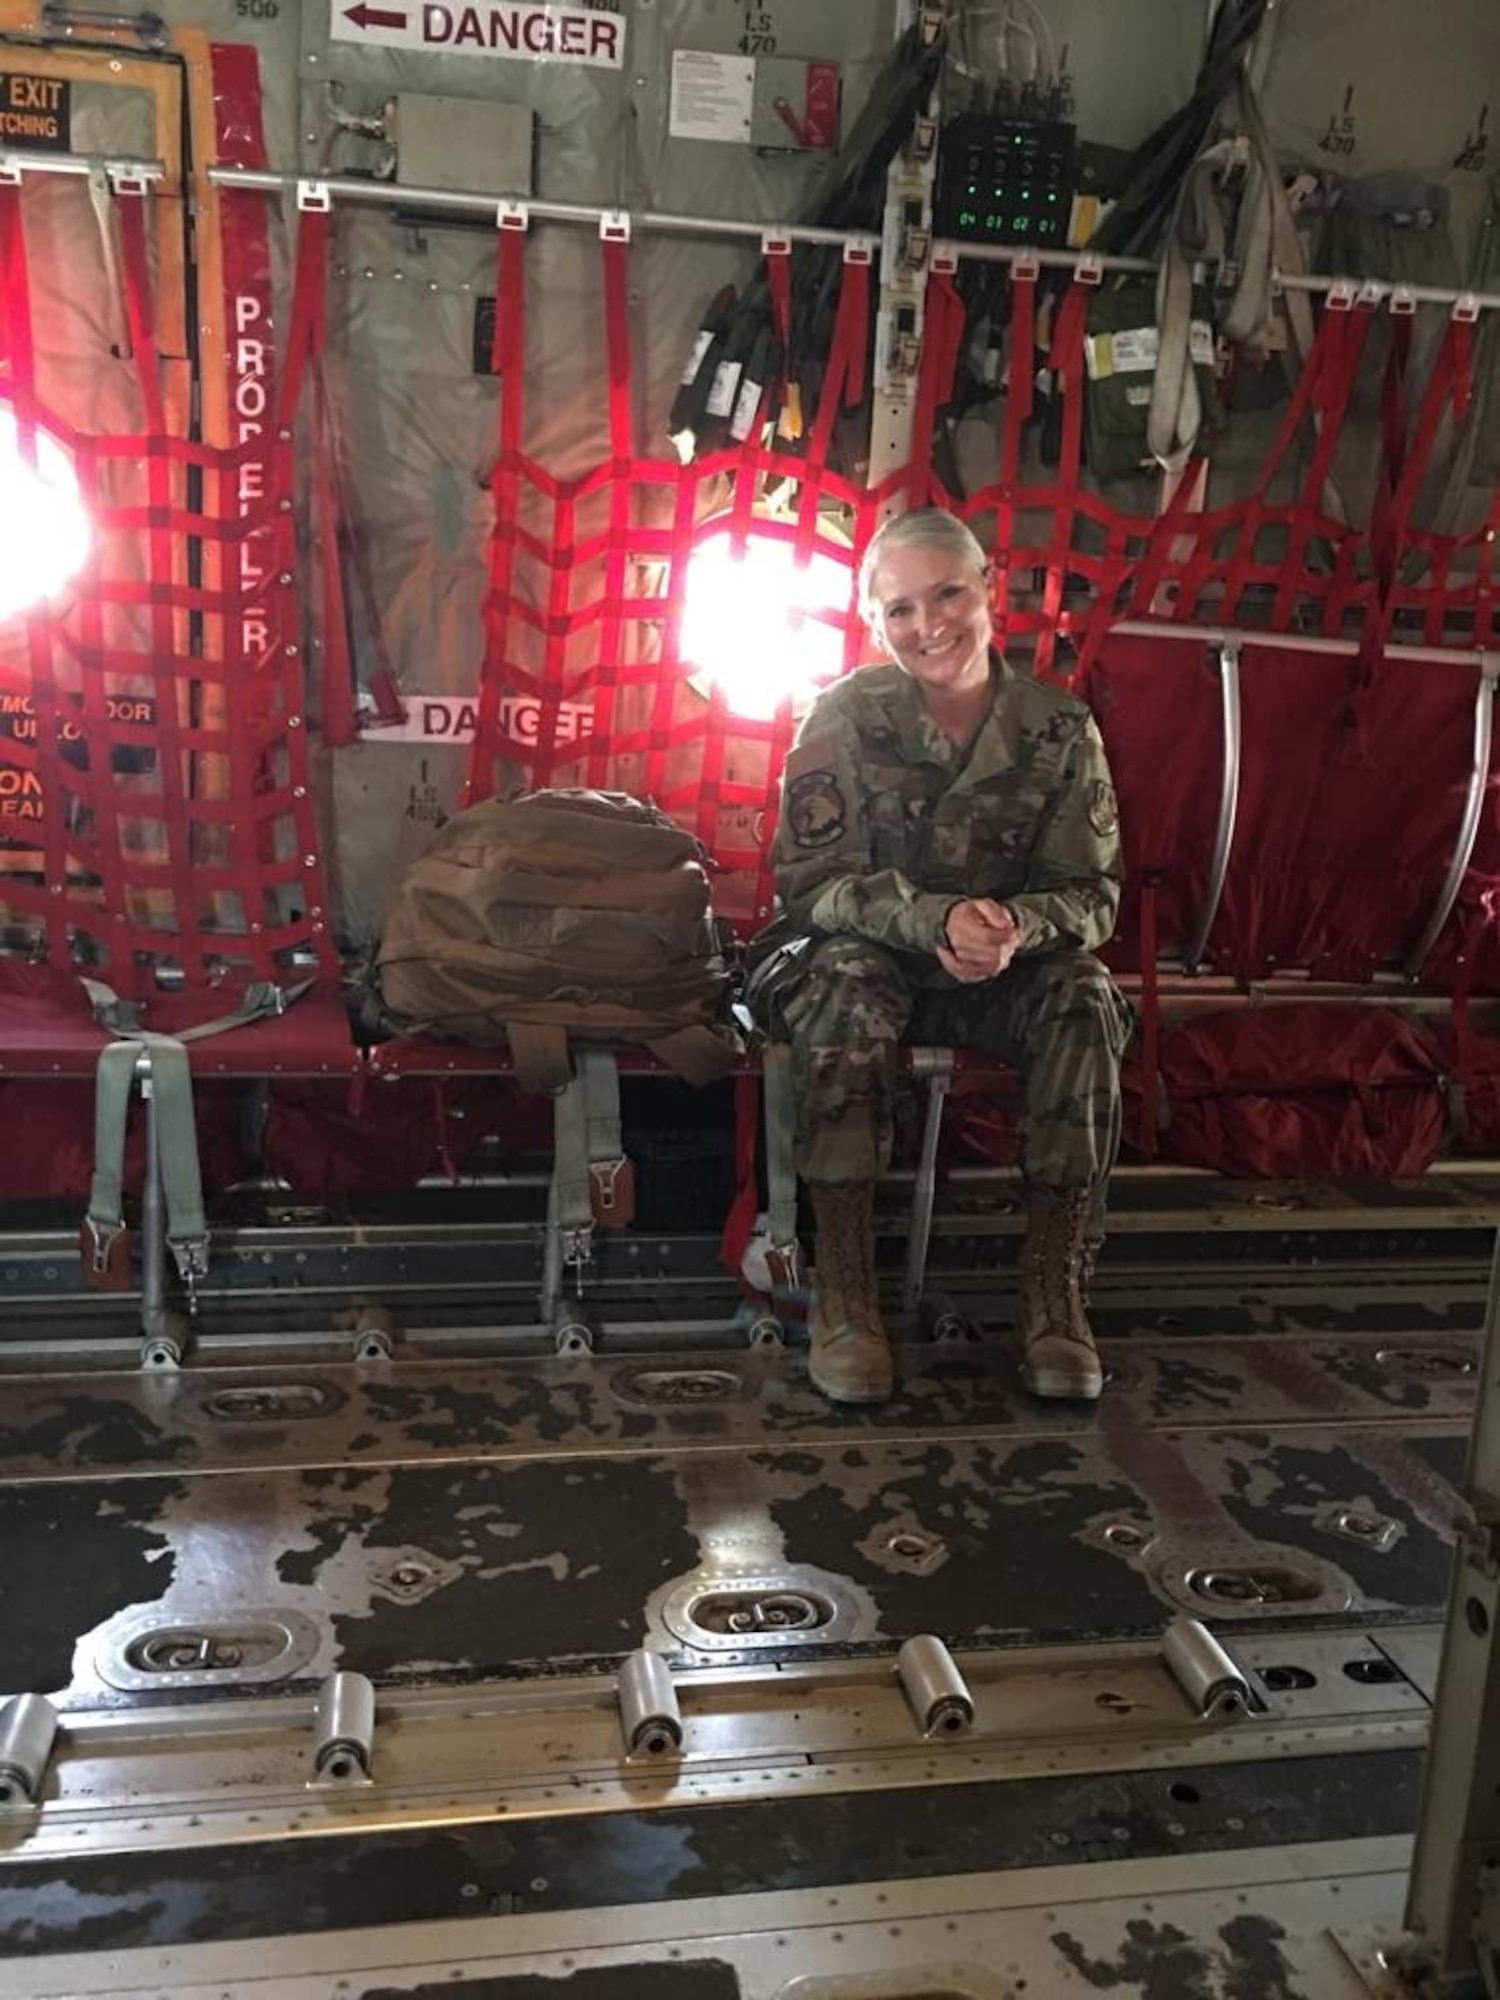 Senior Master Sgt. Joy Rohauer, 913th Airlift Group occupational safety manager, rides in the back of a C-130 Hercules to provide training and guidance to various deployed safety offices in the deployed region. During her deployment, she conducted site visits to various installations located throughout Southwest Asia to include Jordan, Iraq, and Kuwait. (Courtesy photo)